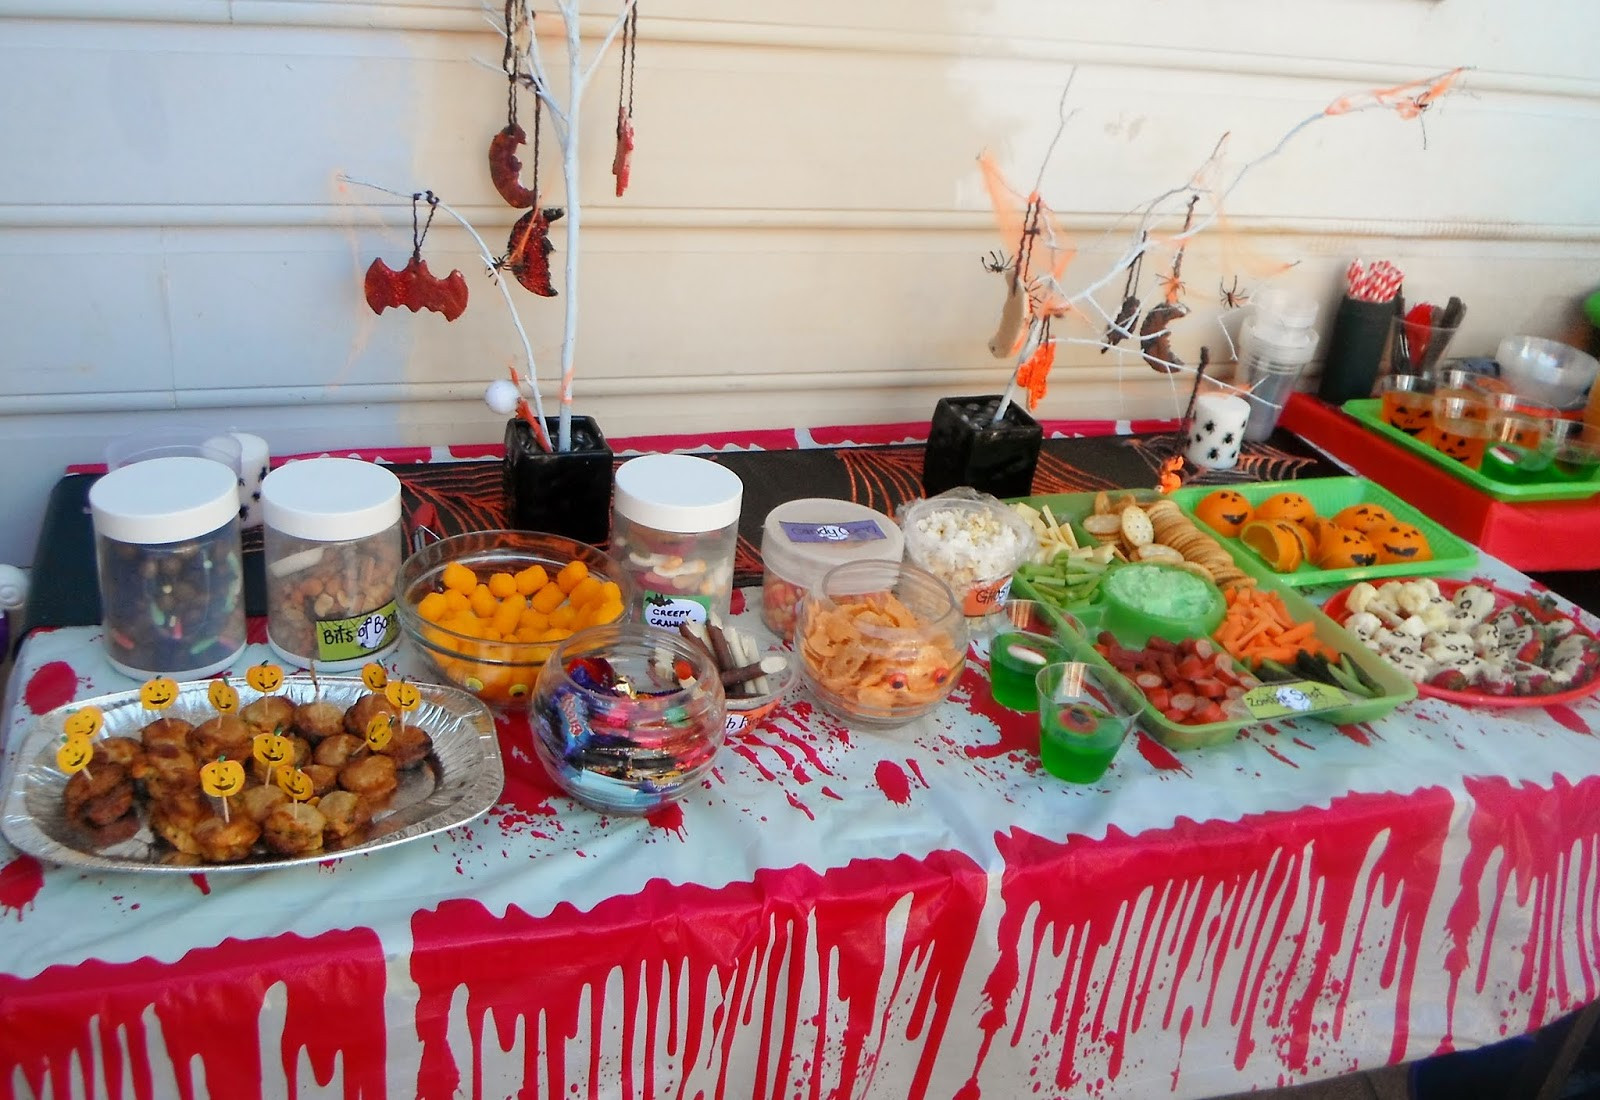 Child Halloween Party Ideas
 Adventures at home with Mum Halloween Party Food